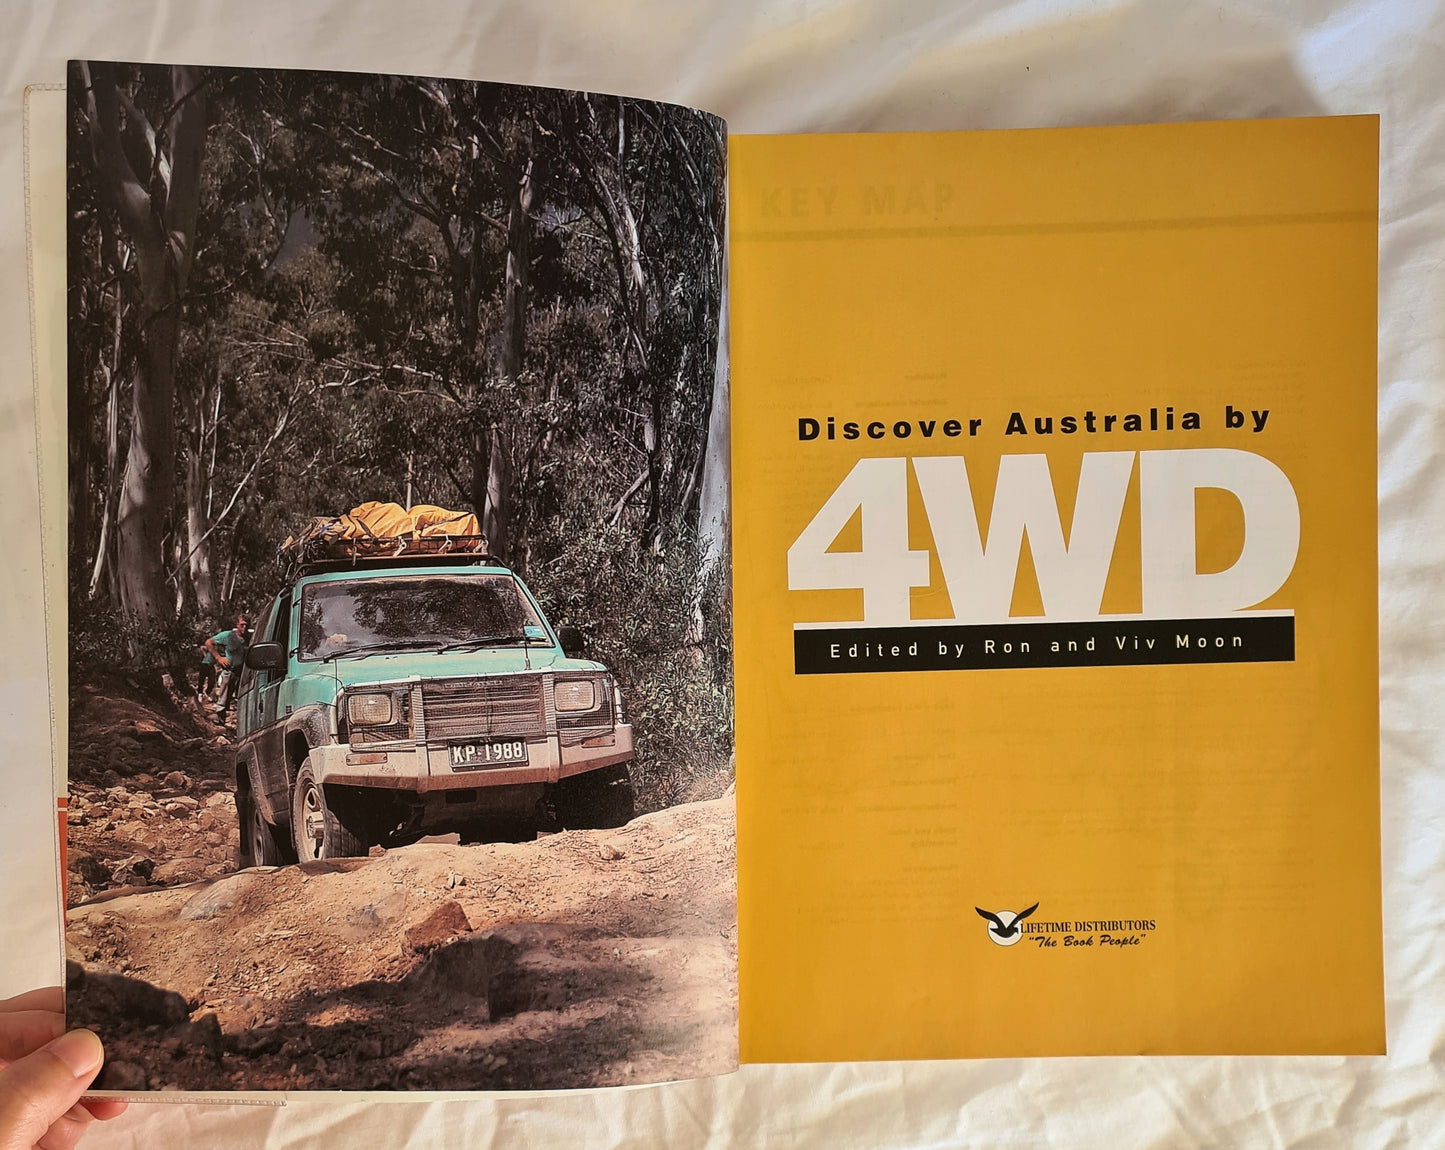 Discover Australia by 4WD  by Ron and Viv Moon